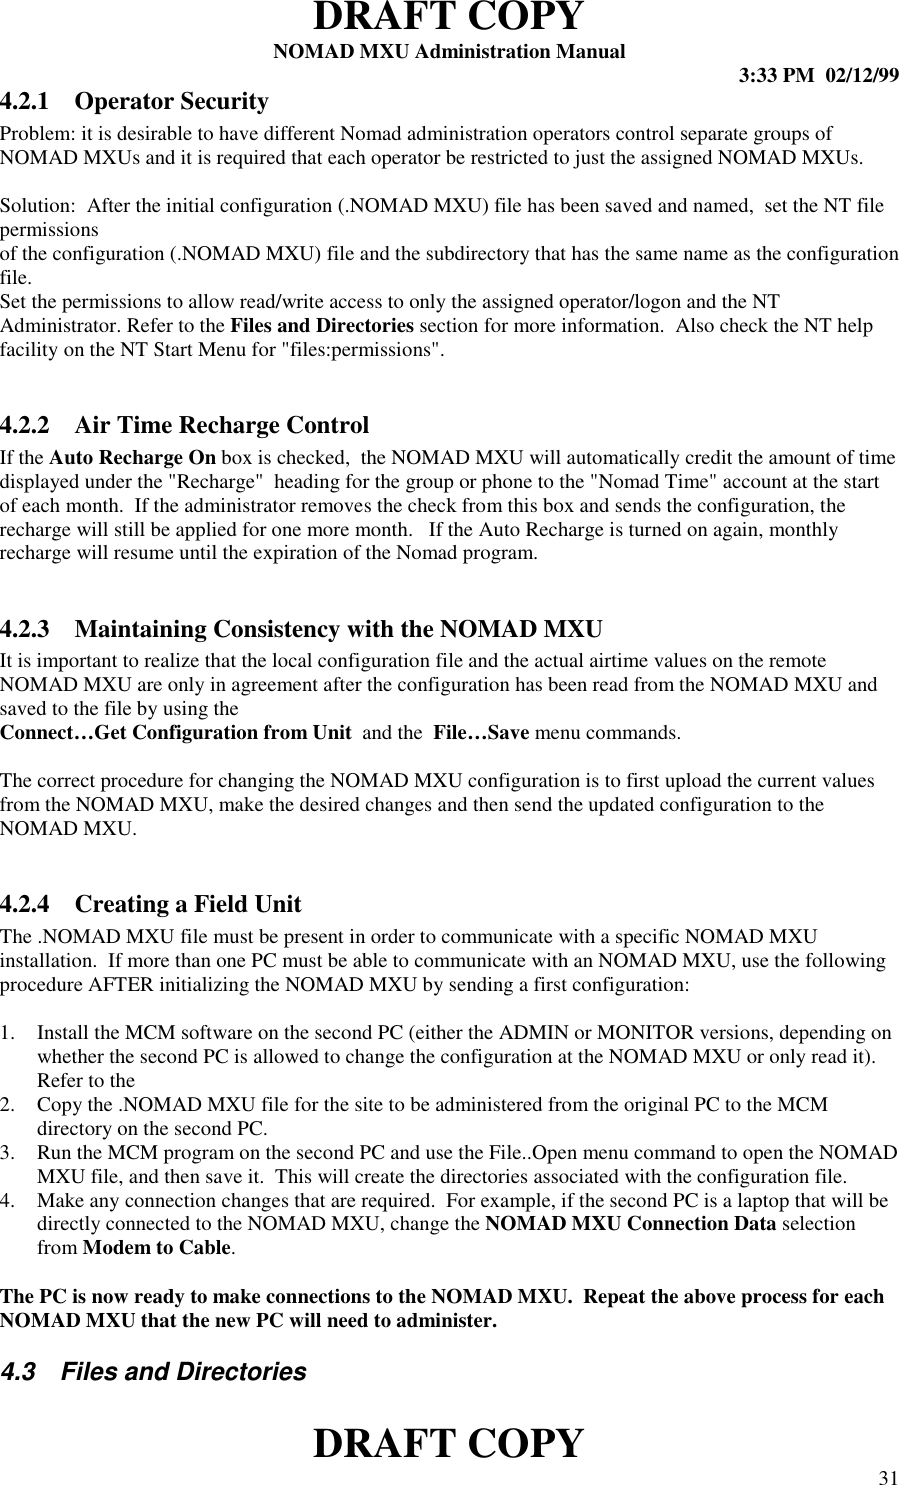 DRAFT COPYNOMAD MXU Administration Manual 3:33 PM  02/12/99DRAFT COPY 314.2.1 Operator SecurityProblem: it is desirable to have different Nomad administration operators control separate groups ofNOMAD MXUs and it is required that each operator be restricted to just the assigned NOMAD MXUs.Solution:  After the initial configuration (.NOMAD MXU) file has been saved and named,  set the NT filepermissionsof the configuration (.NOMAD MXU) file and the subdirectory that has the same name as the configurationfile.Set the permissions to allow read/write access to only the assigned operator/logon and the NTAdministrator. Refer to the Files and Directories section for more information.  Also check the NT helpfacility on the NT Start Menu for &quot;files:permissions&quot;.4.2.2 Air Time Recharge ControlIf the Auto Recharge On box is checked,  the NOMAD MXU will automatically credit the amount of timedisplayed under the &quot;Recharge&quot;  heading for the group or phone to the &quot;Nomad Time&quot; account at the startof each month.  If the administrator removes the check from this box and sends the configuration, therecharge will still be applied for one more month.   If the Auto Recharge is turned on again, monthlyrecharge will resume until the expiration of the Nomad program.4.2.3 Maintaining Consistency with the NOMAD MXUIt is important to realize that the local configuration file and the actual airtime values on the remoteNOMAD MXU are only in agreement after the configuration has been read from the NOMAD MXU andsaved to the file by using theConnect…Get Configuration from Unit  and the  File…Save menu commands.The correct procedure for changing the NOMAD MXU configuration is to first upload the current valuesfrom the NOMAD MXU, make the desired changes and then send the updated configuration to theNOMAD MXU.4.2.4 Creating a Field UnitThe .NOMAD MXU file must be present in order to communicate with a specific NOMAD MXUinstallation.  If more than one PC must be able to communicate with an NOMAD MXU, use the followingprocedure AFTER initializing the NOMAD MXU by sending a first configuration:1. Install the MCM software on the second PC (either the ADMIN or MONITOR versions, depending onwhether the second PC is allowed to change the configuration at the NOMAD MXU or only read it).Refer to the2. Copy the .NOMAD MXU file for the site to be administered from the original PC to the MCMdirectory on the second PC.3. Run the MCM program on the second PC and use the File..Open menu command to open the NOMADMXU file, and then save it.  This will create the directories associated with the configuration file.4. Make any connection changes that are required.  For example, if the second PC is a laptop that will bedirectly connected to the NOMAD MXU, change the NOMAD MXU Connection Data selectionfrom Modem to Cable.The PC is now ready to make connections to the NOMAD MXU.  Repeat the above process for eachNOMAD MXU that the new PC will need to administer.4.3  Files and Directories